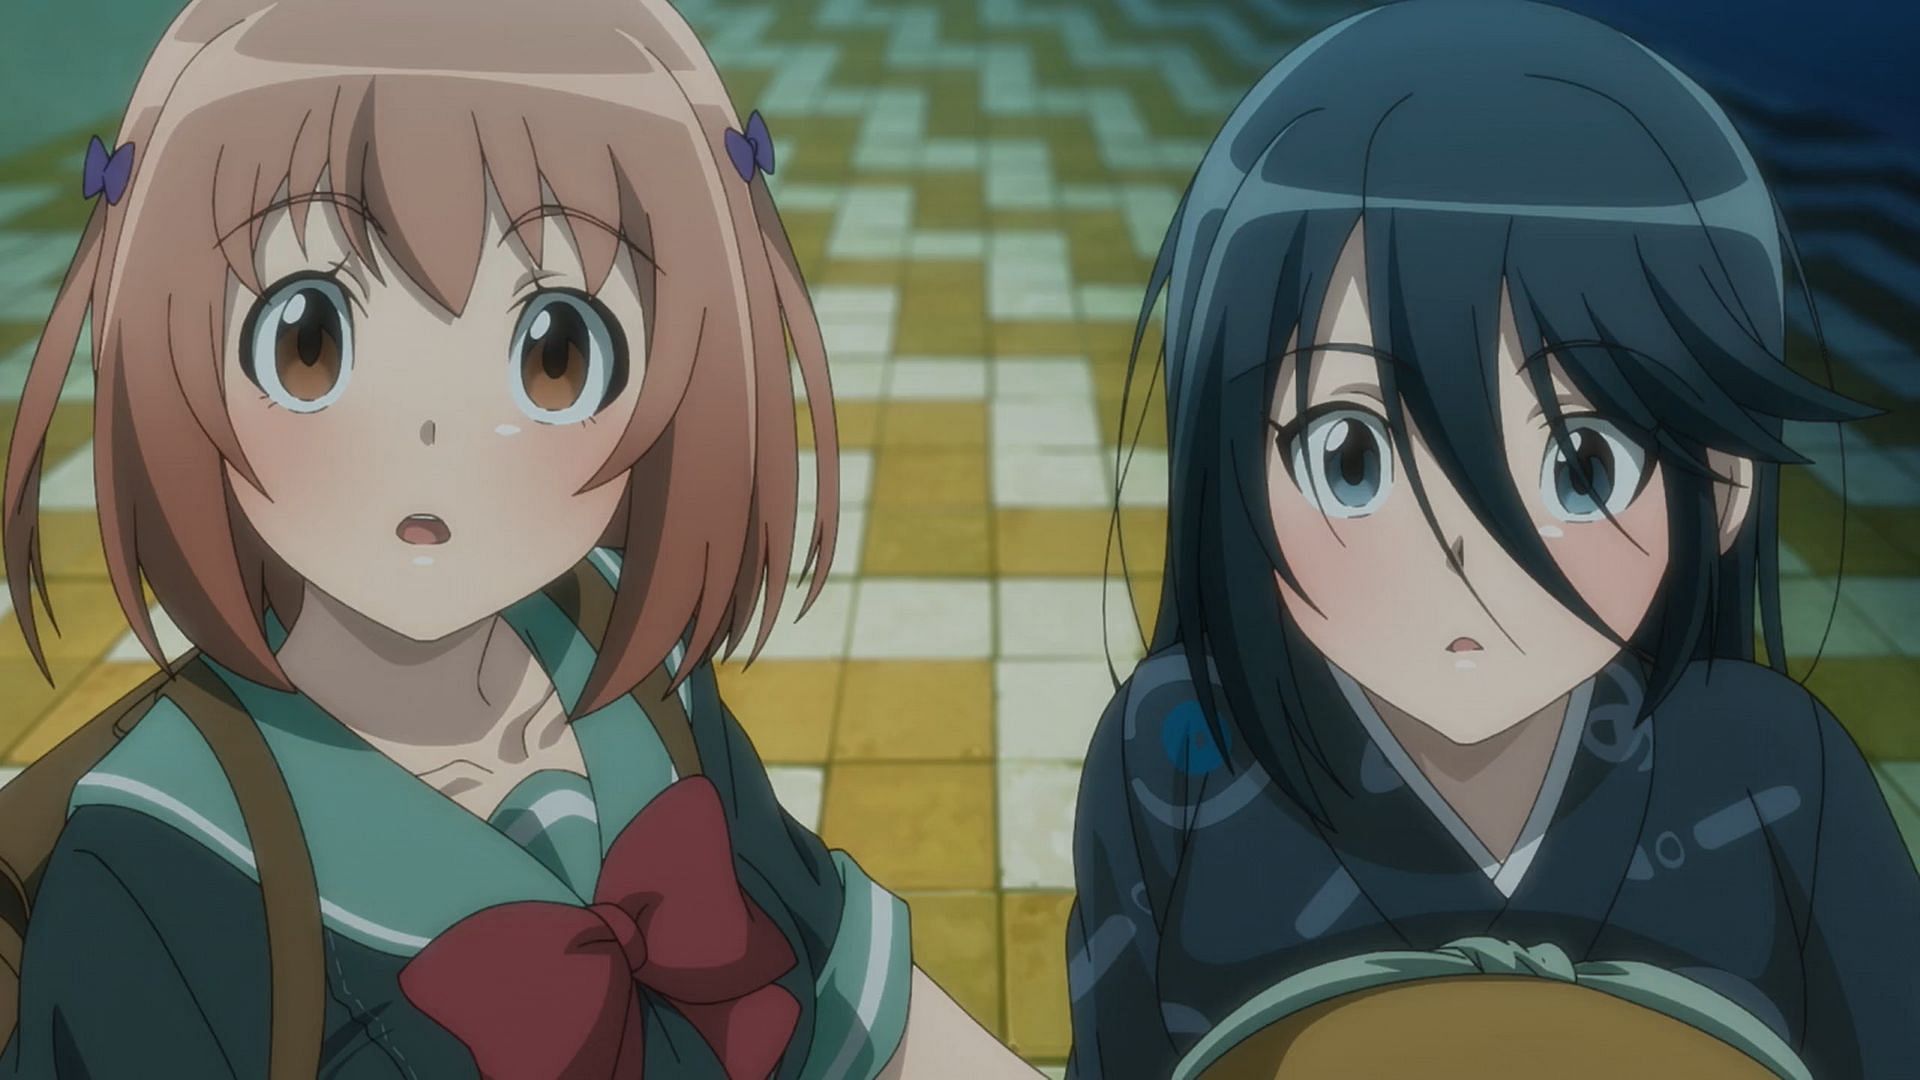 Chiho and Suzuno as seen in The Devil is a Part-Timer (Image via Studio 3Hz)